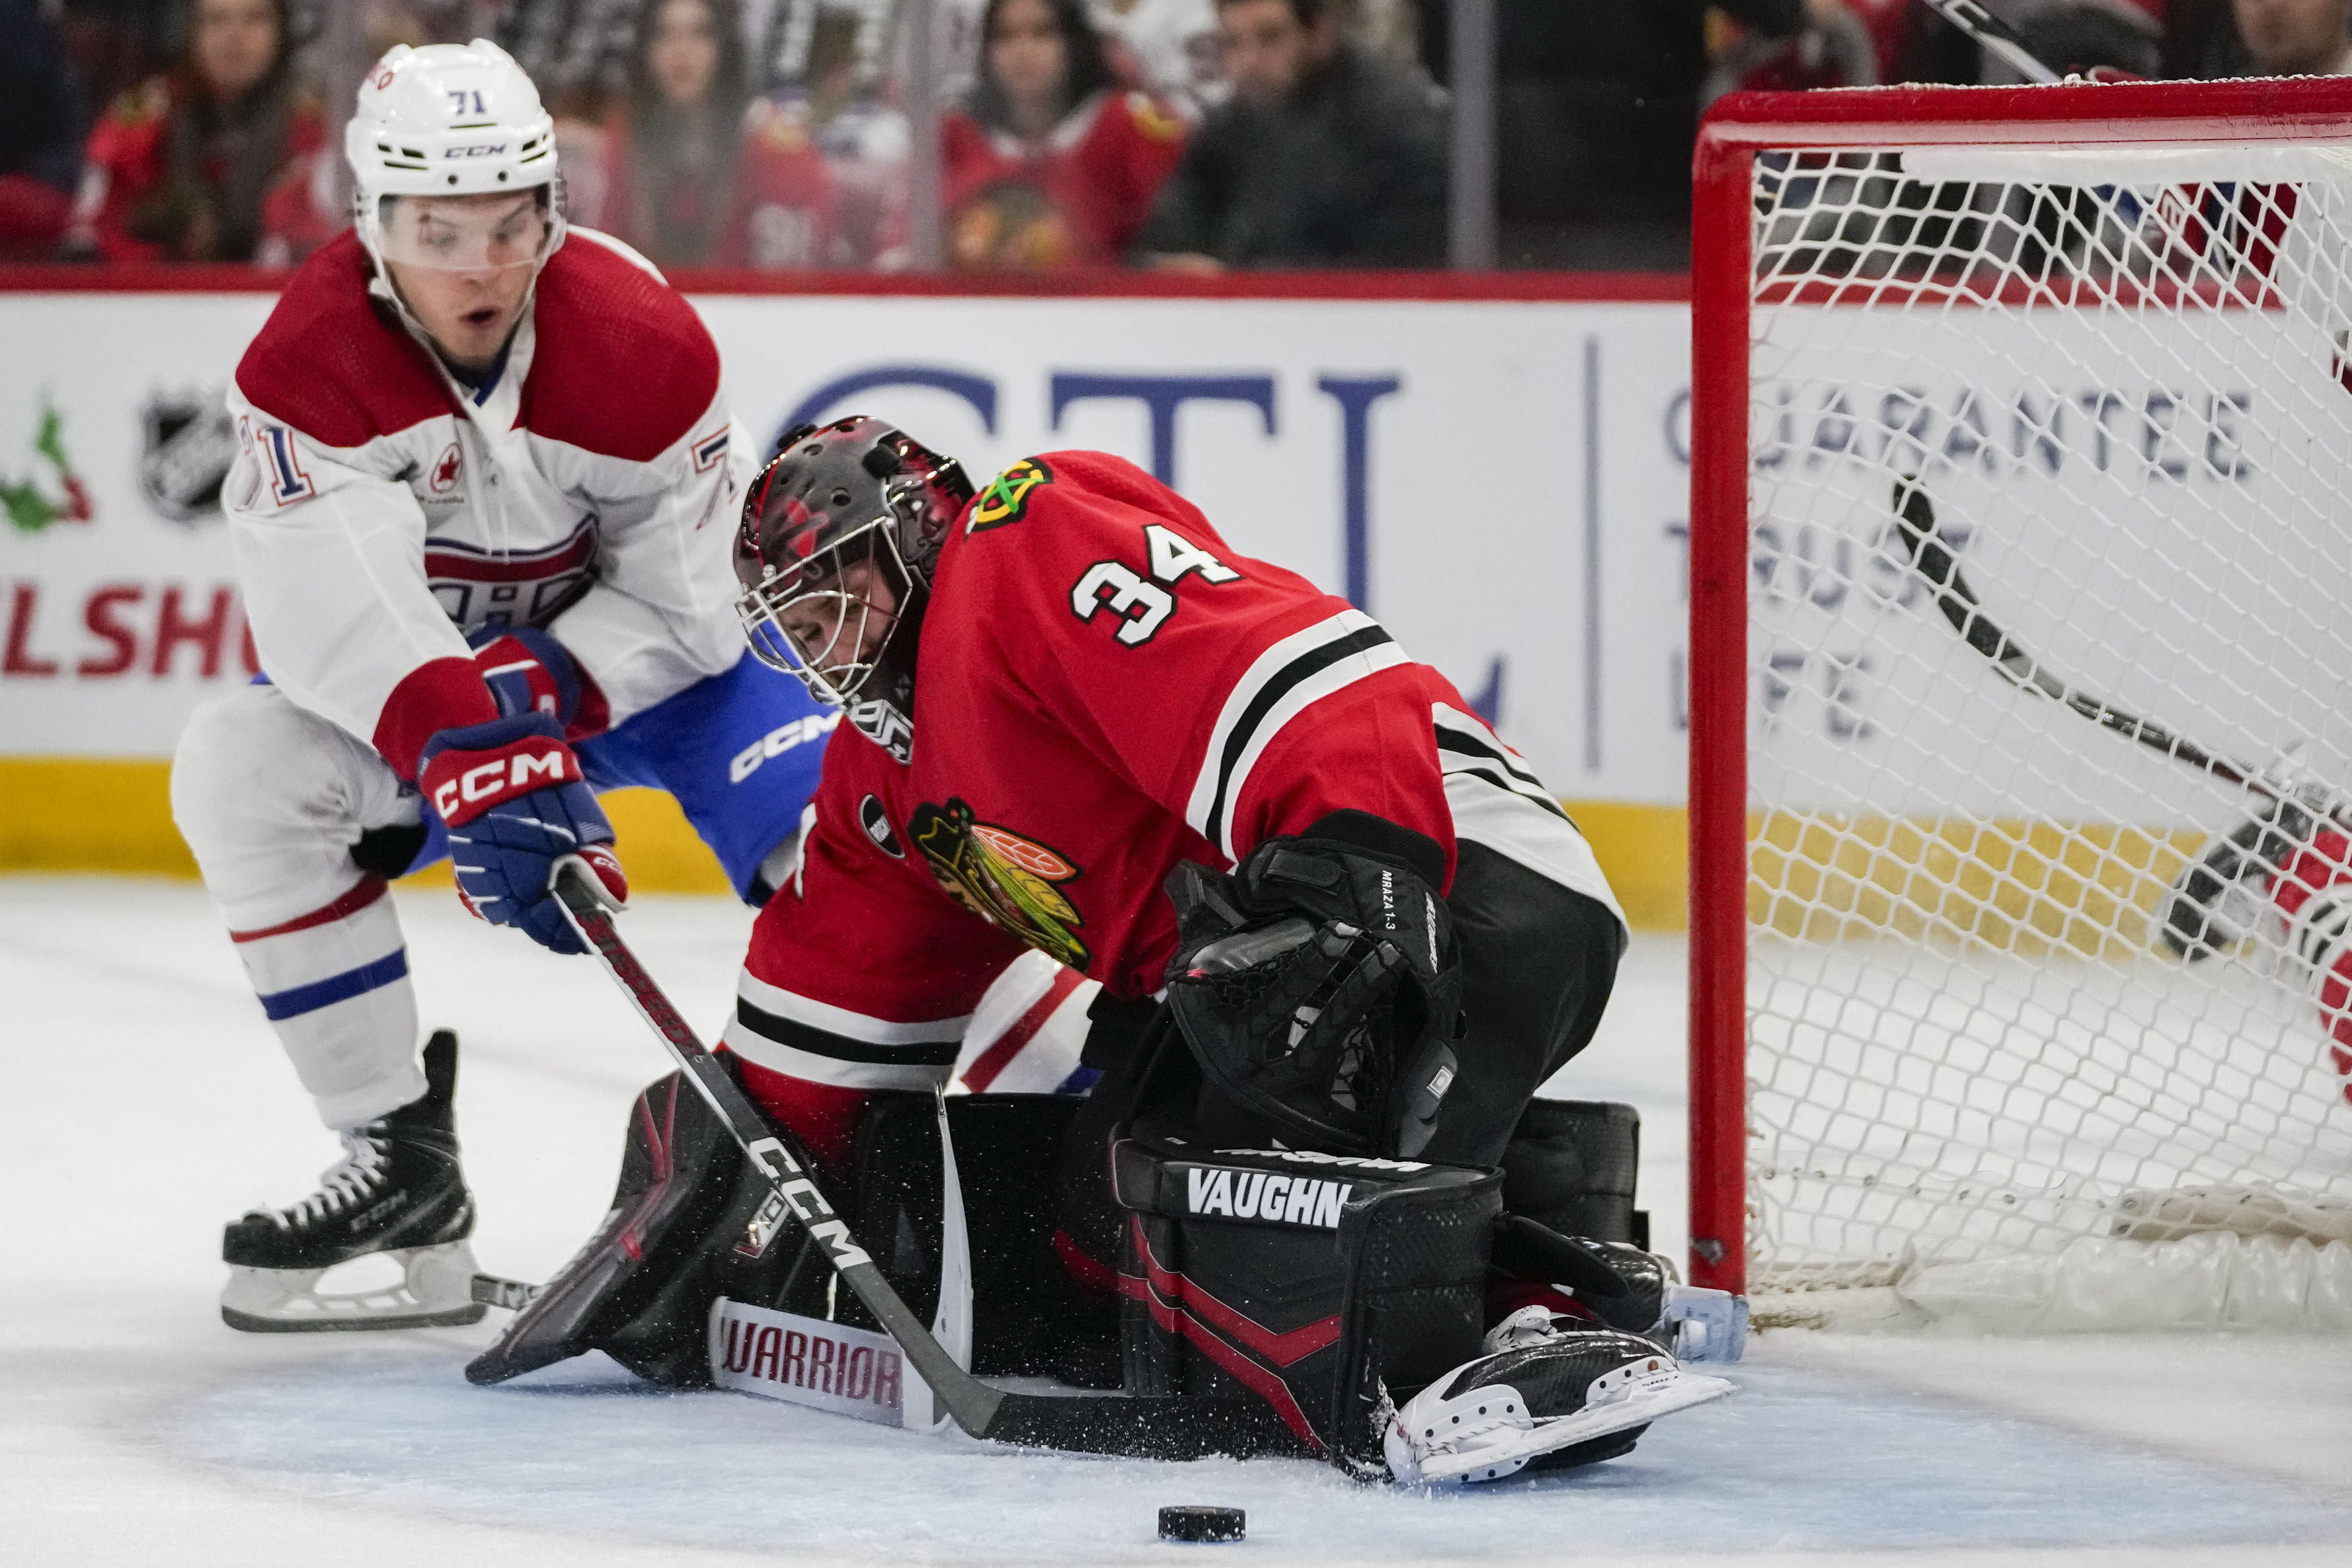 Call of the Wilde: Montreal Canadiens handle Chicago Blackhawks